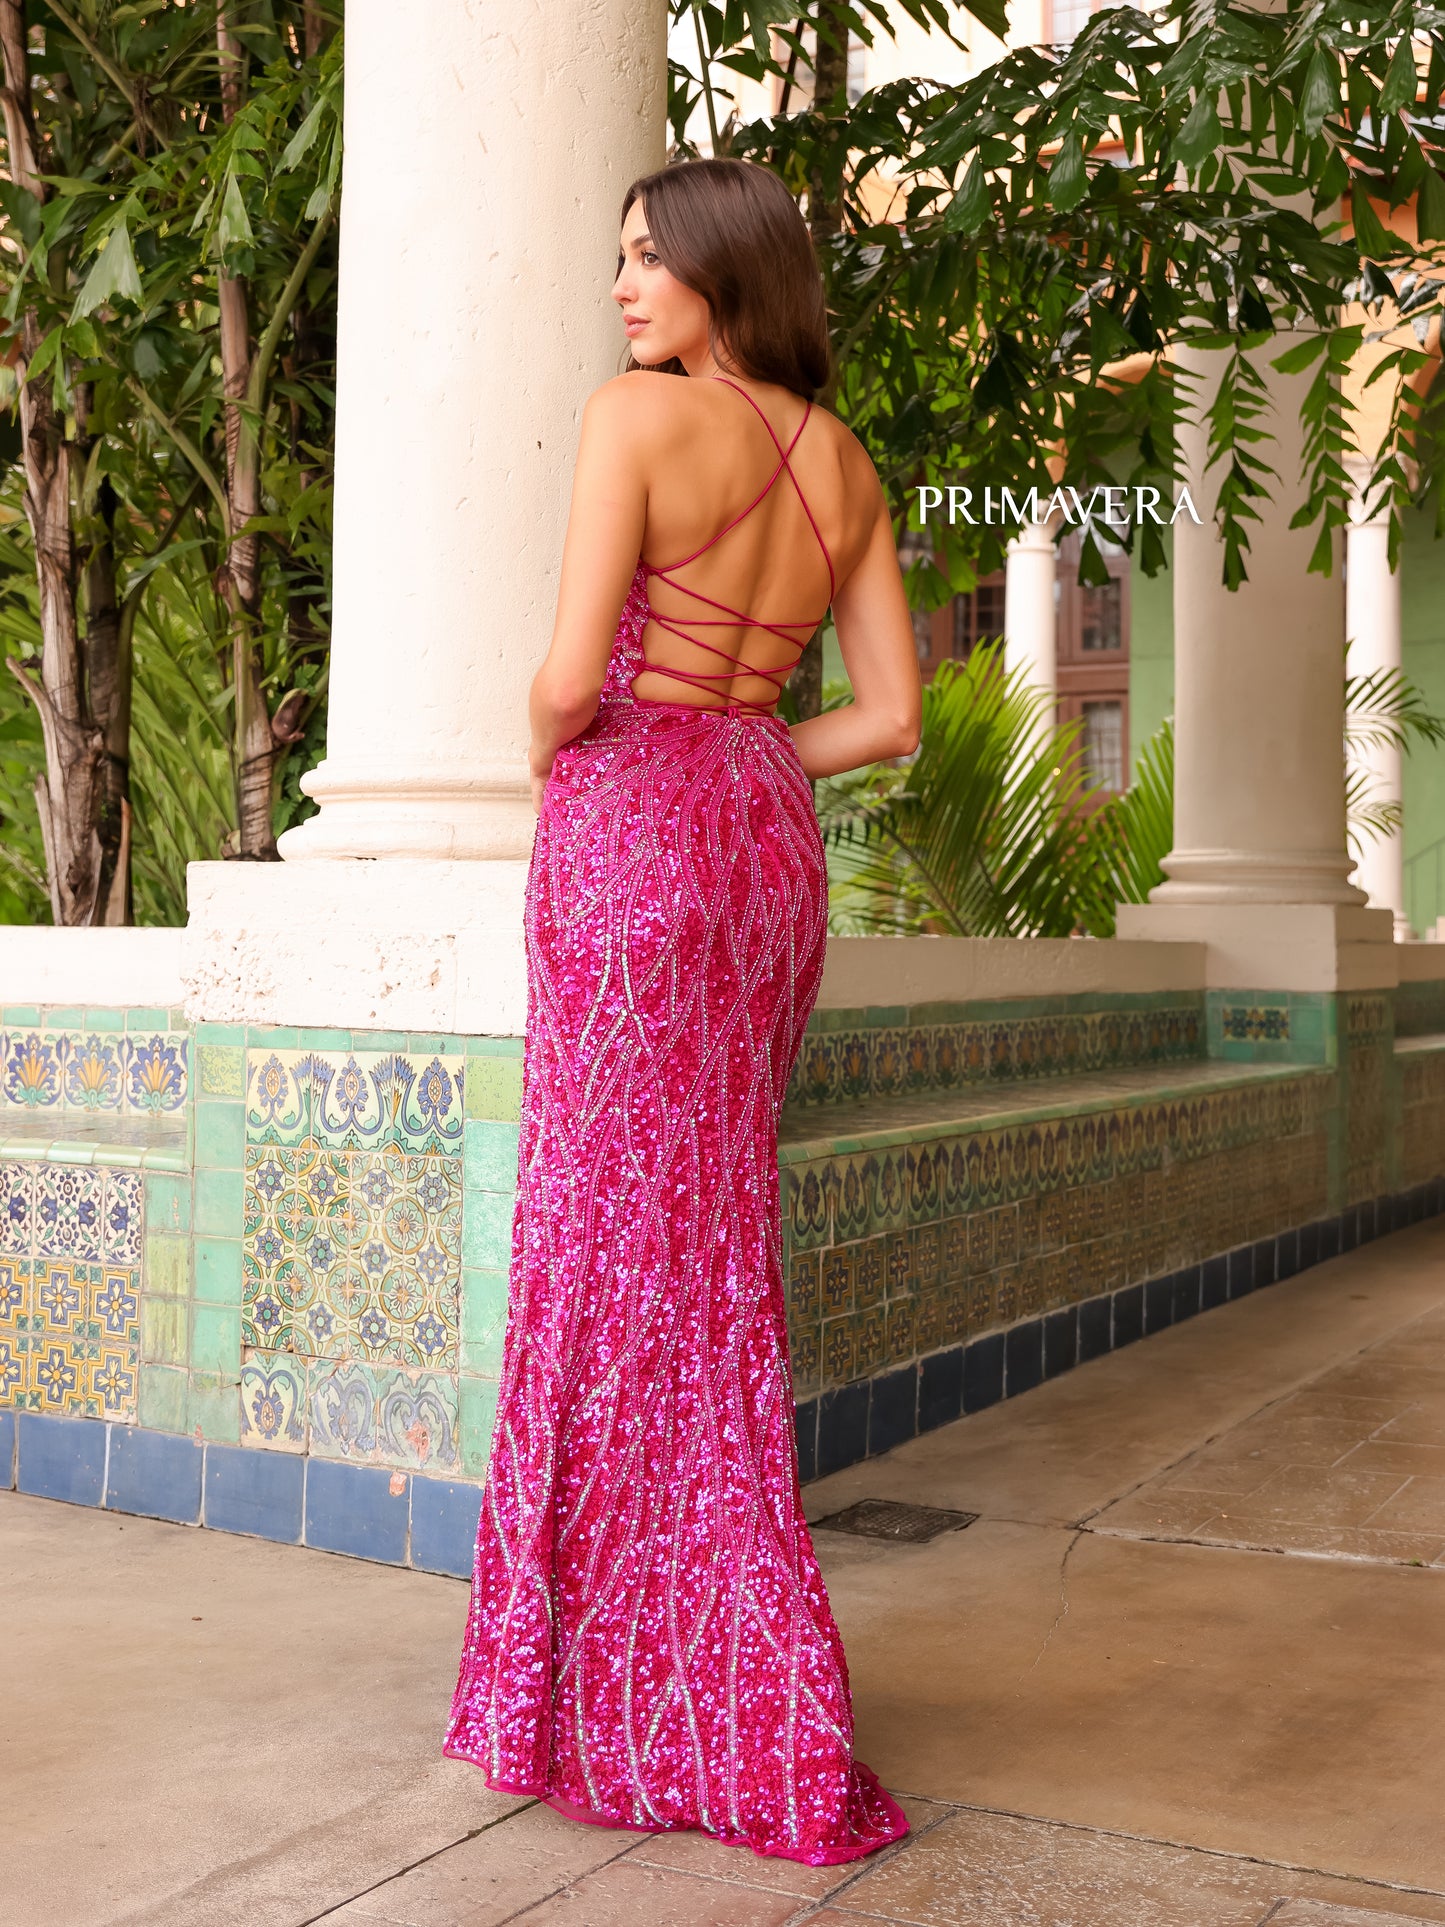 Primavera Couture 3959 Prom Dress Long Beaded Gown. This Gown has a beautiful design all over. Primavera Couture 3959 Sequin Scoop neck Prom Dress Backless Corset Slit Formal Gown  Size-000-18  Colors-Lilac, Coral, Fuchsia, Jade, Peacock, Purple 